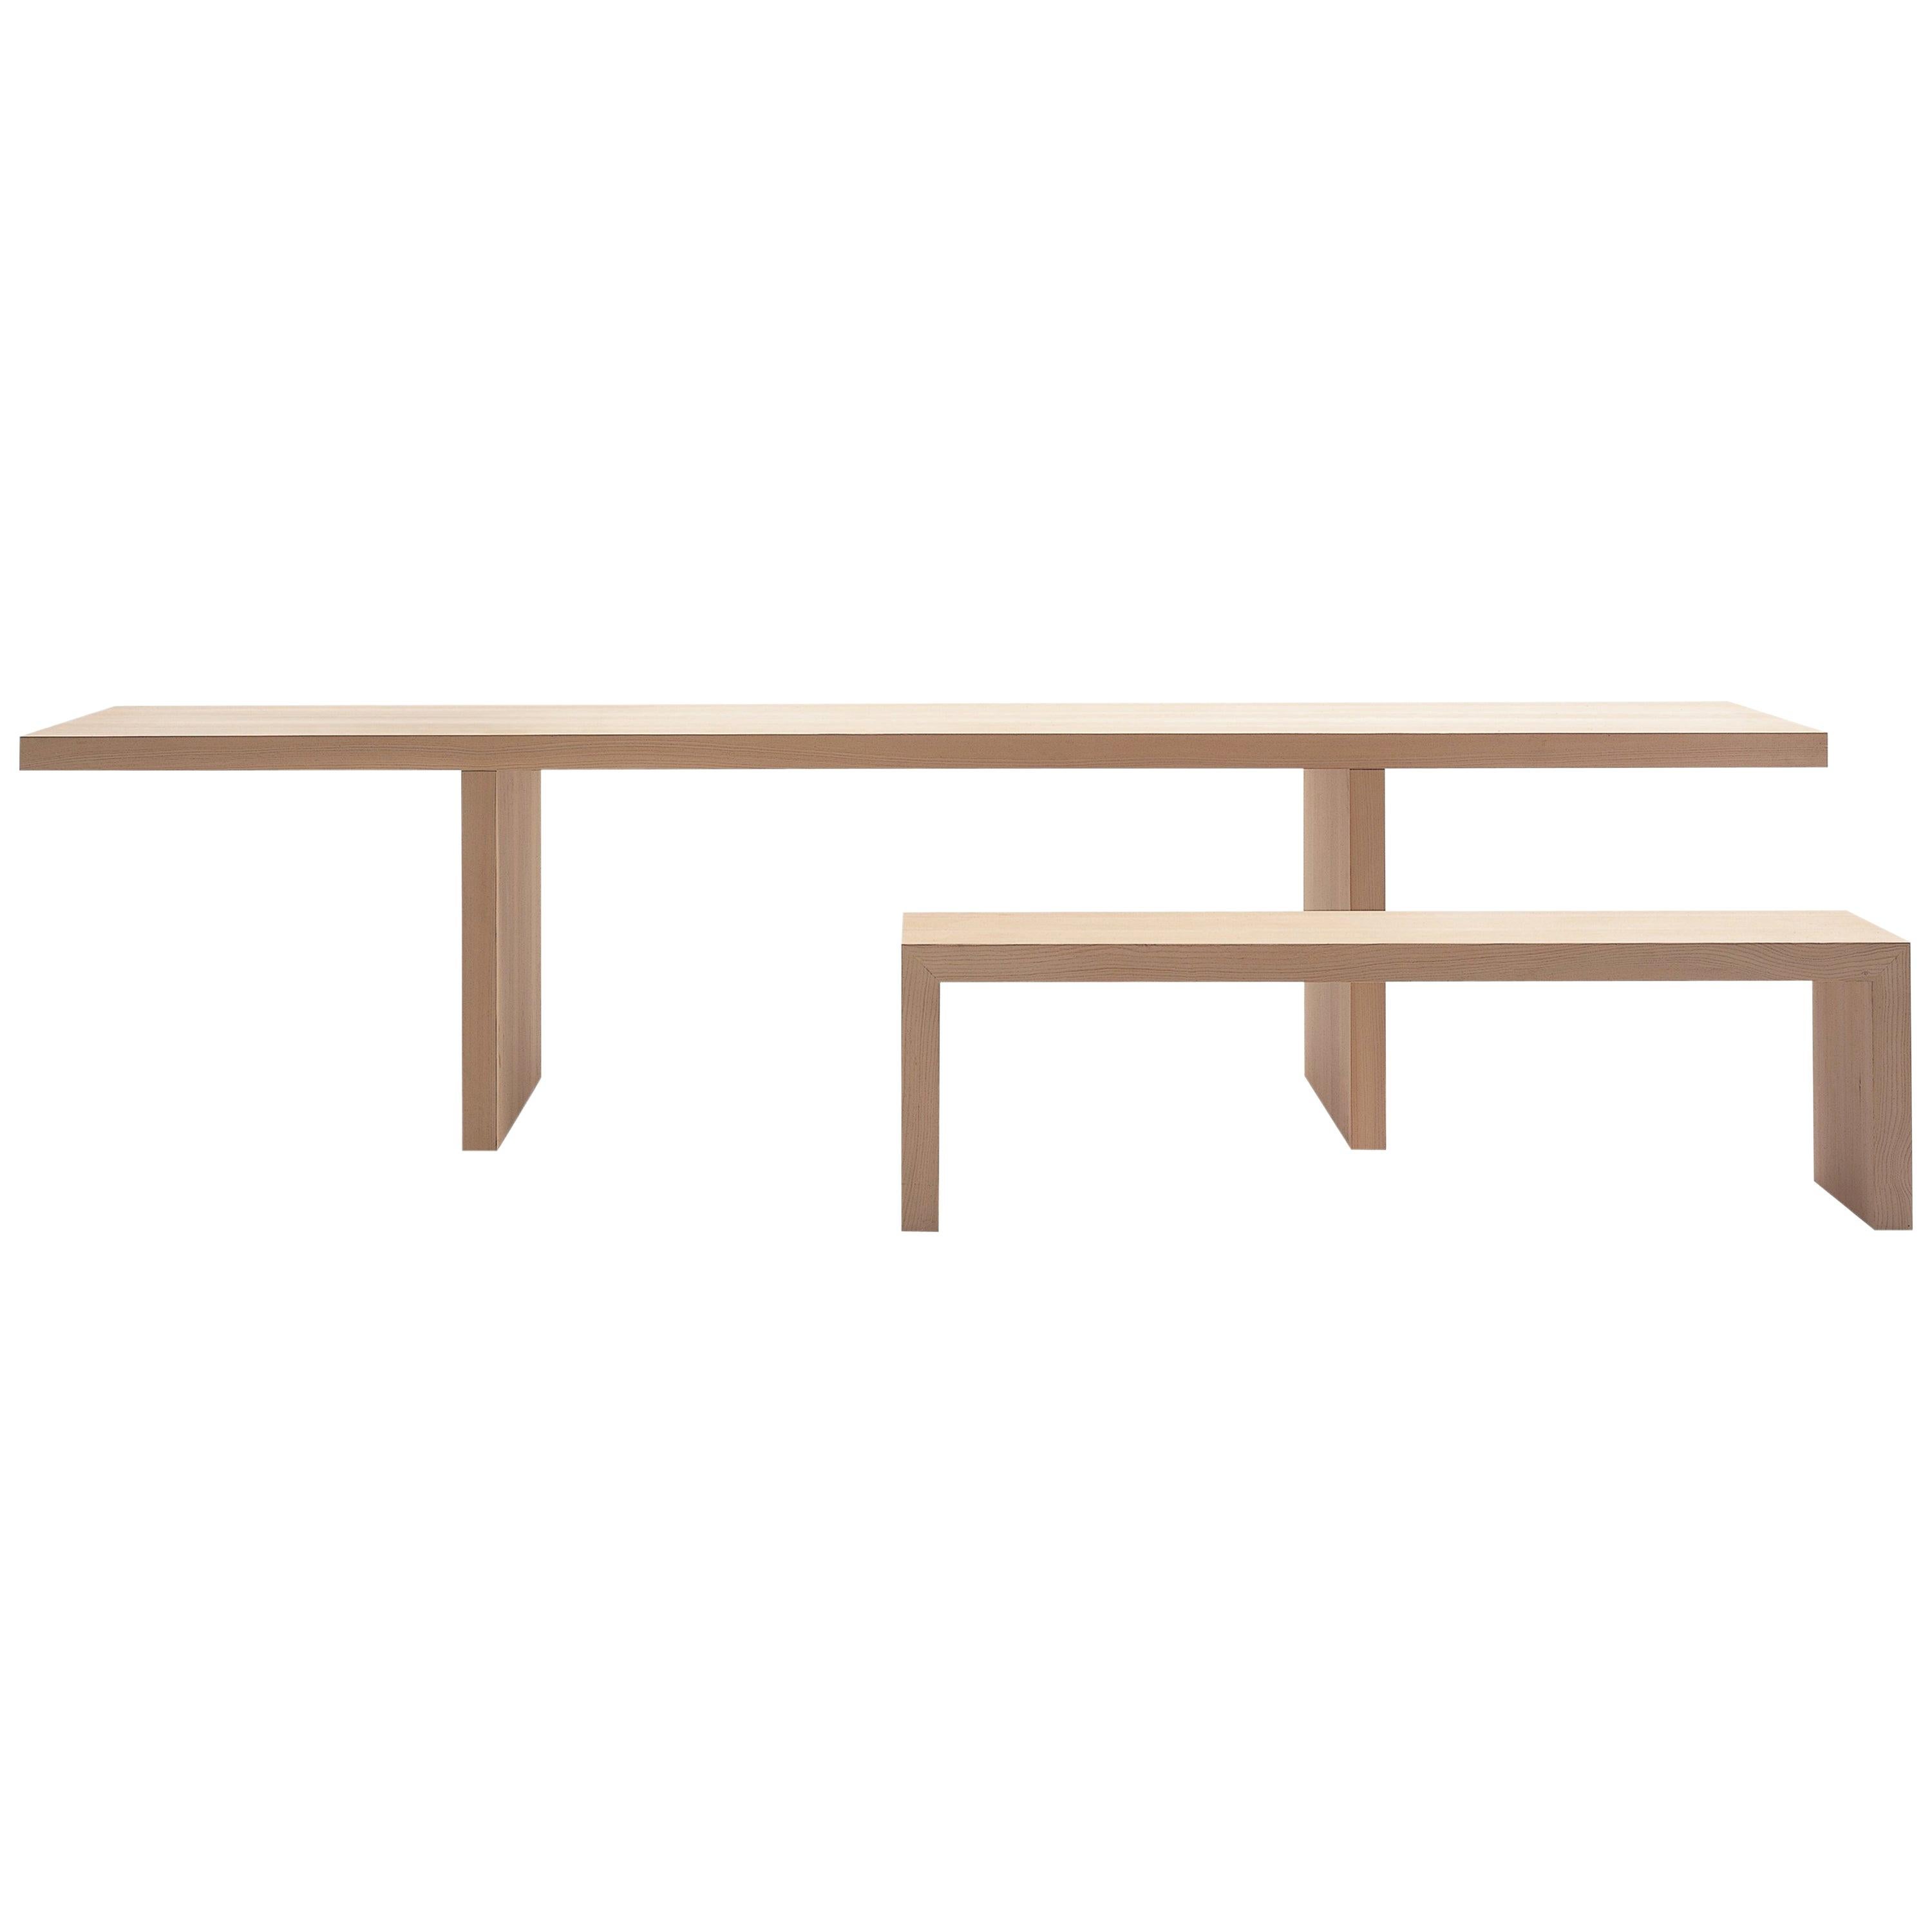 Claudio Silvestrin Millenium Hope Table in Natural Oak for Cappellini For Sale